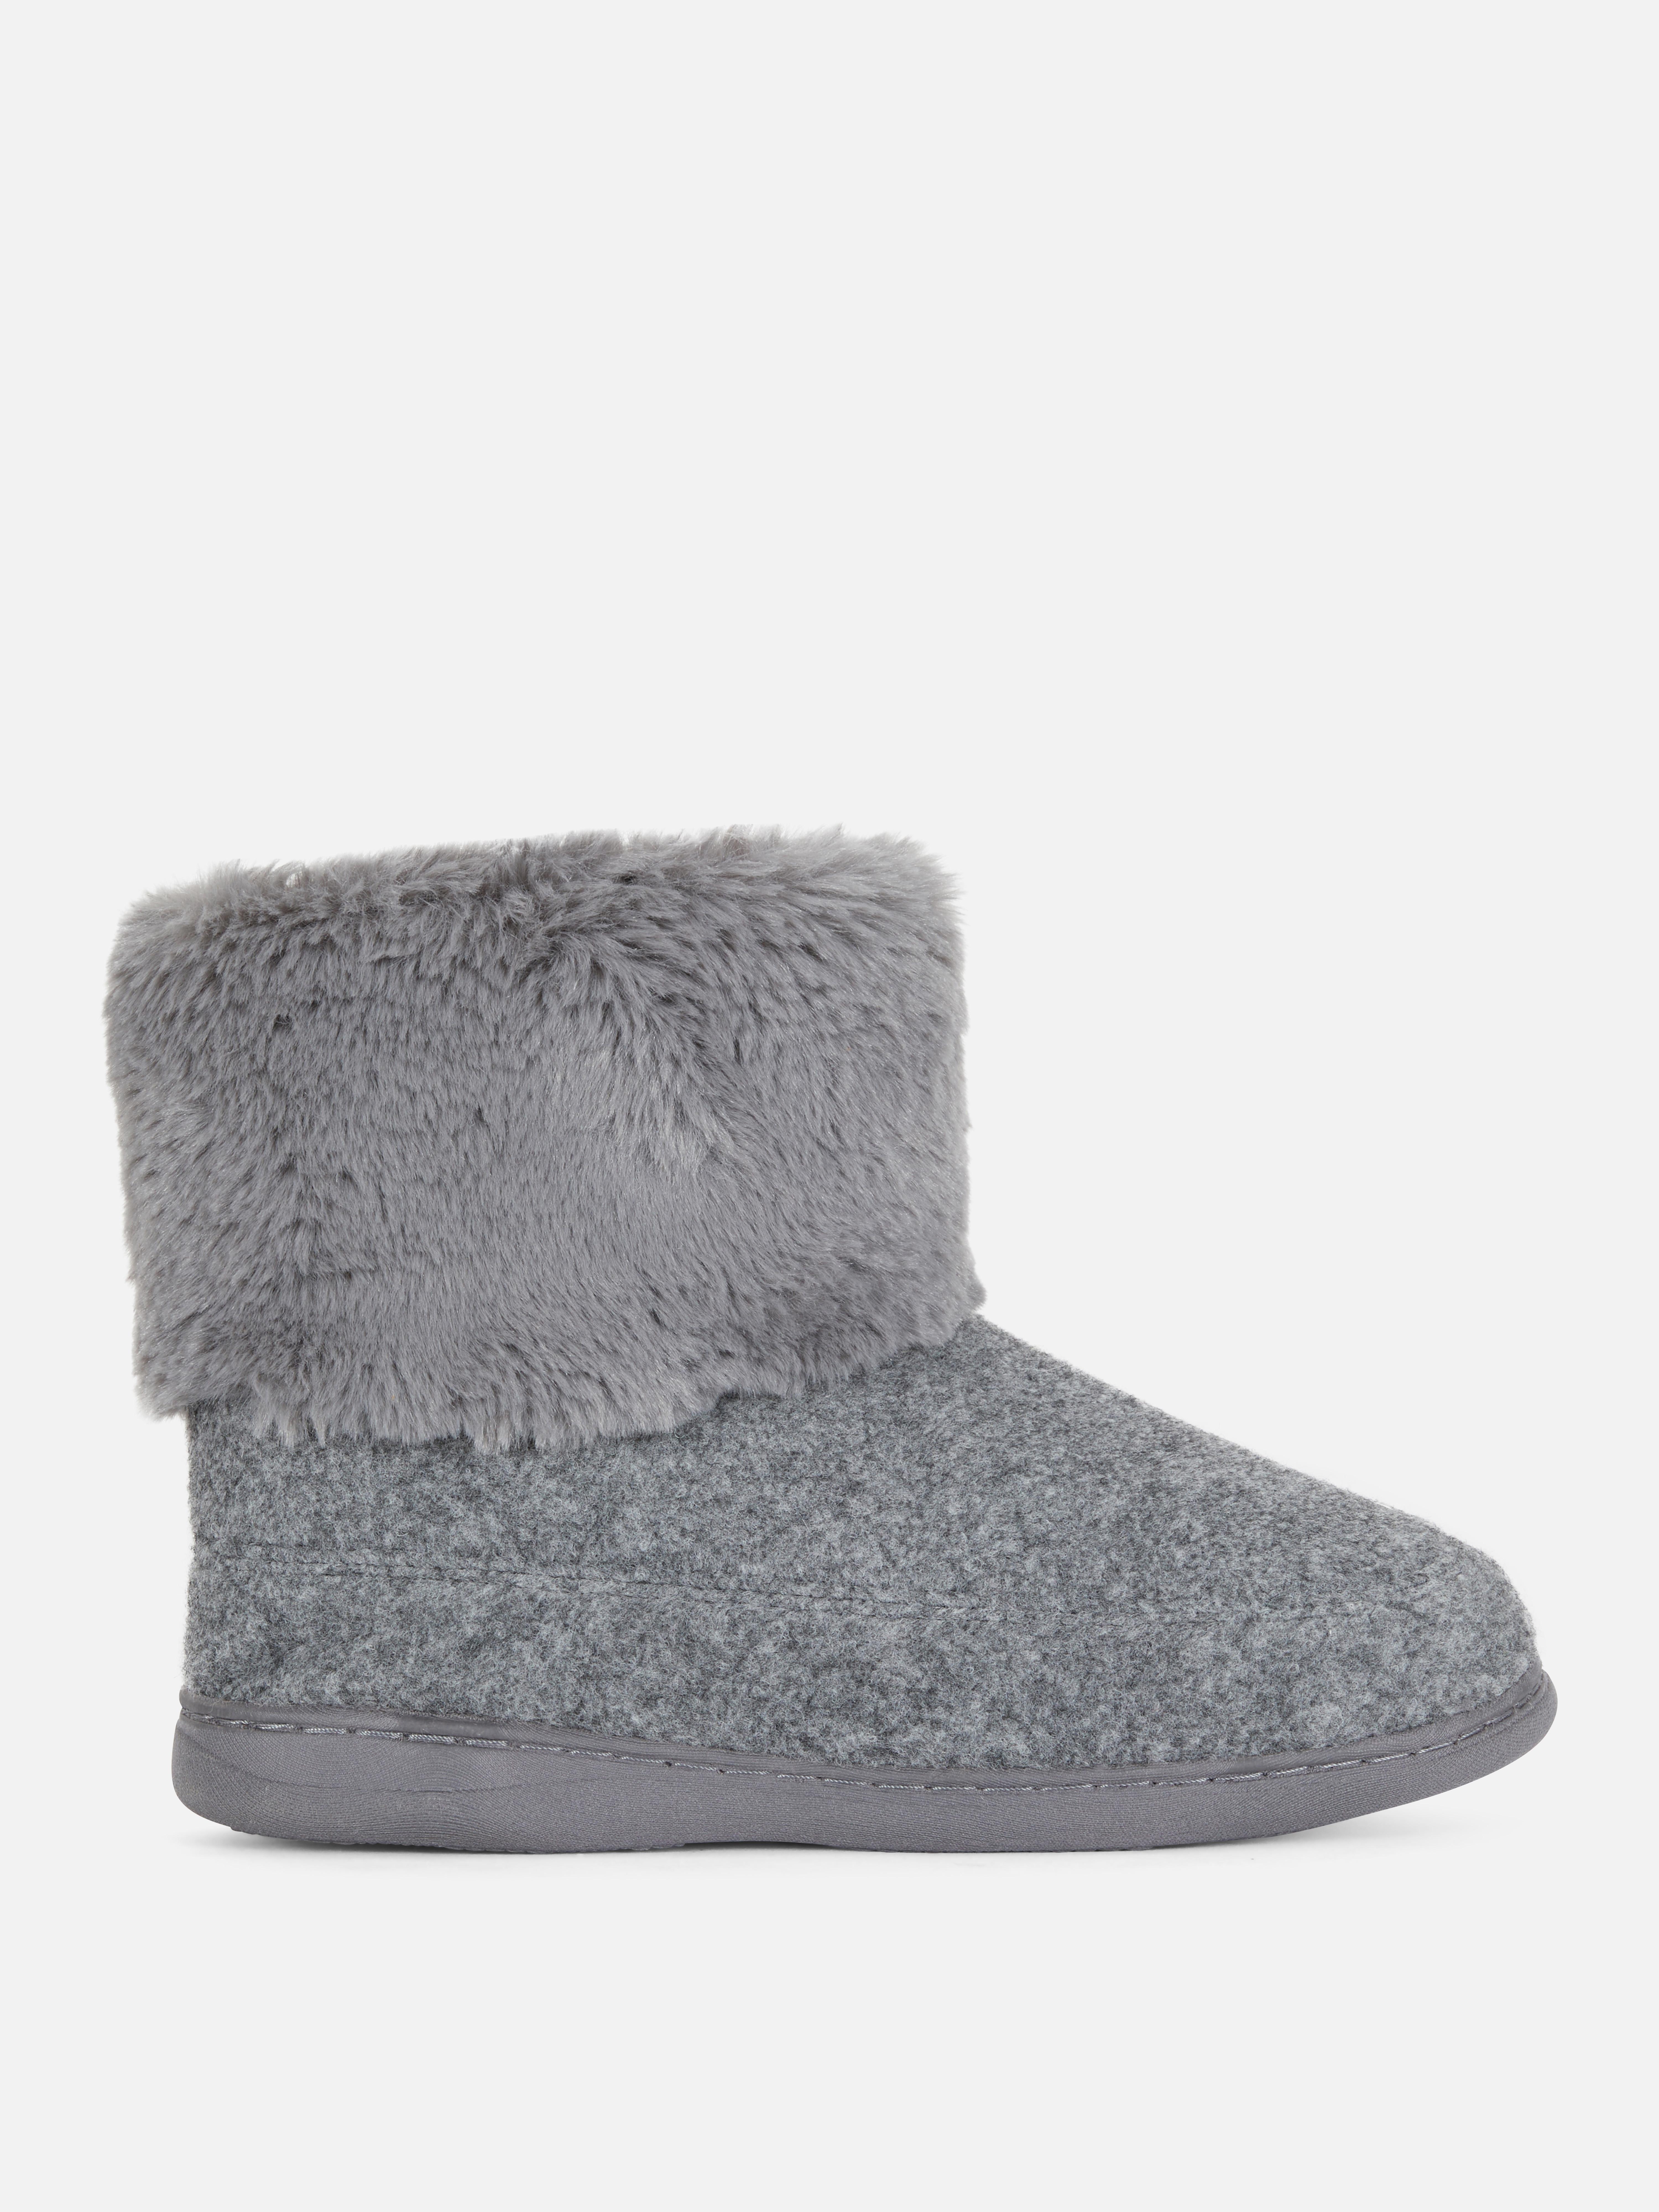 Faux Fur Lined Bootie Slippers | Primark